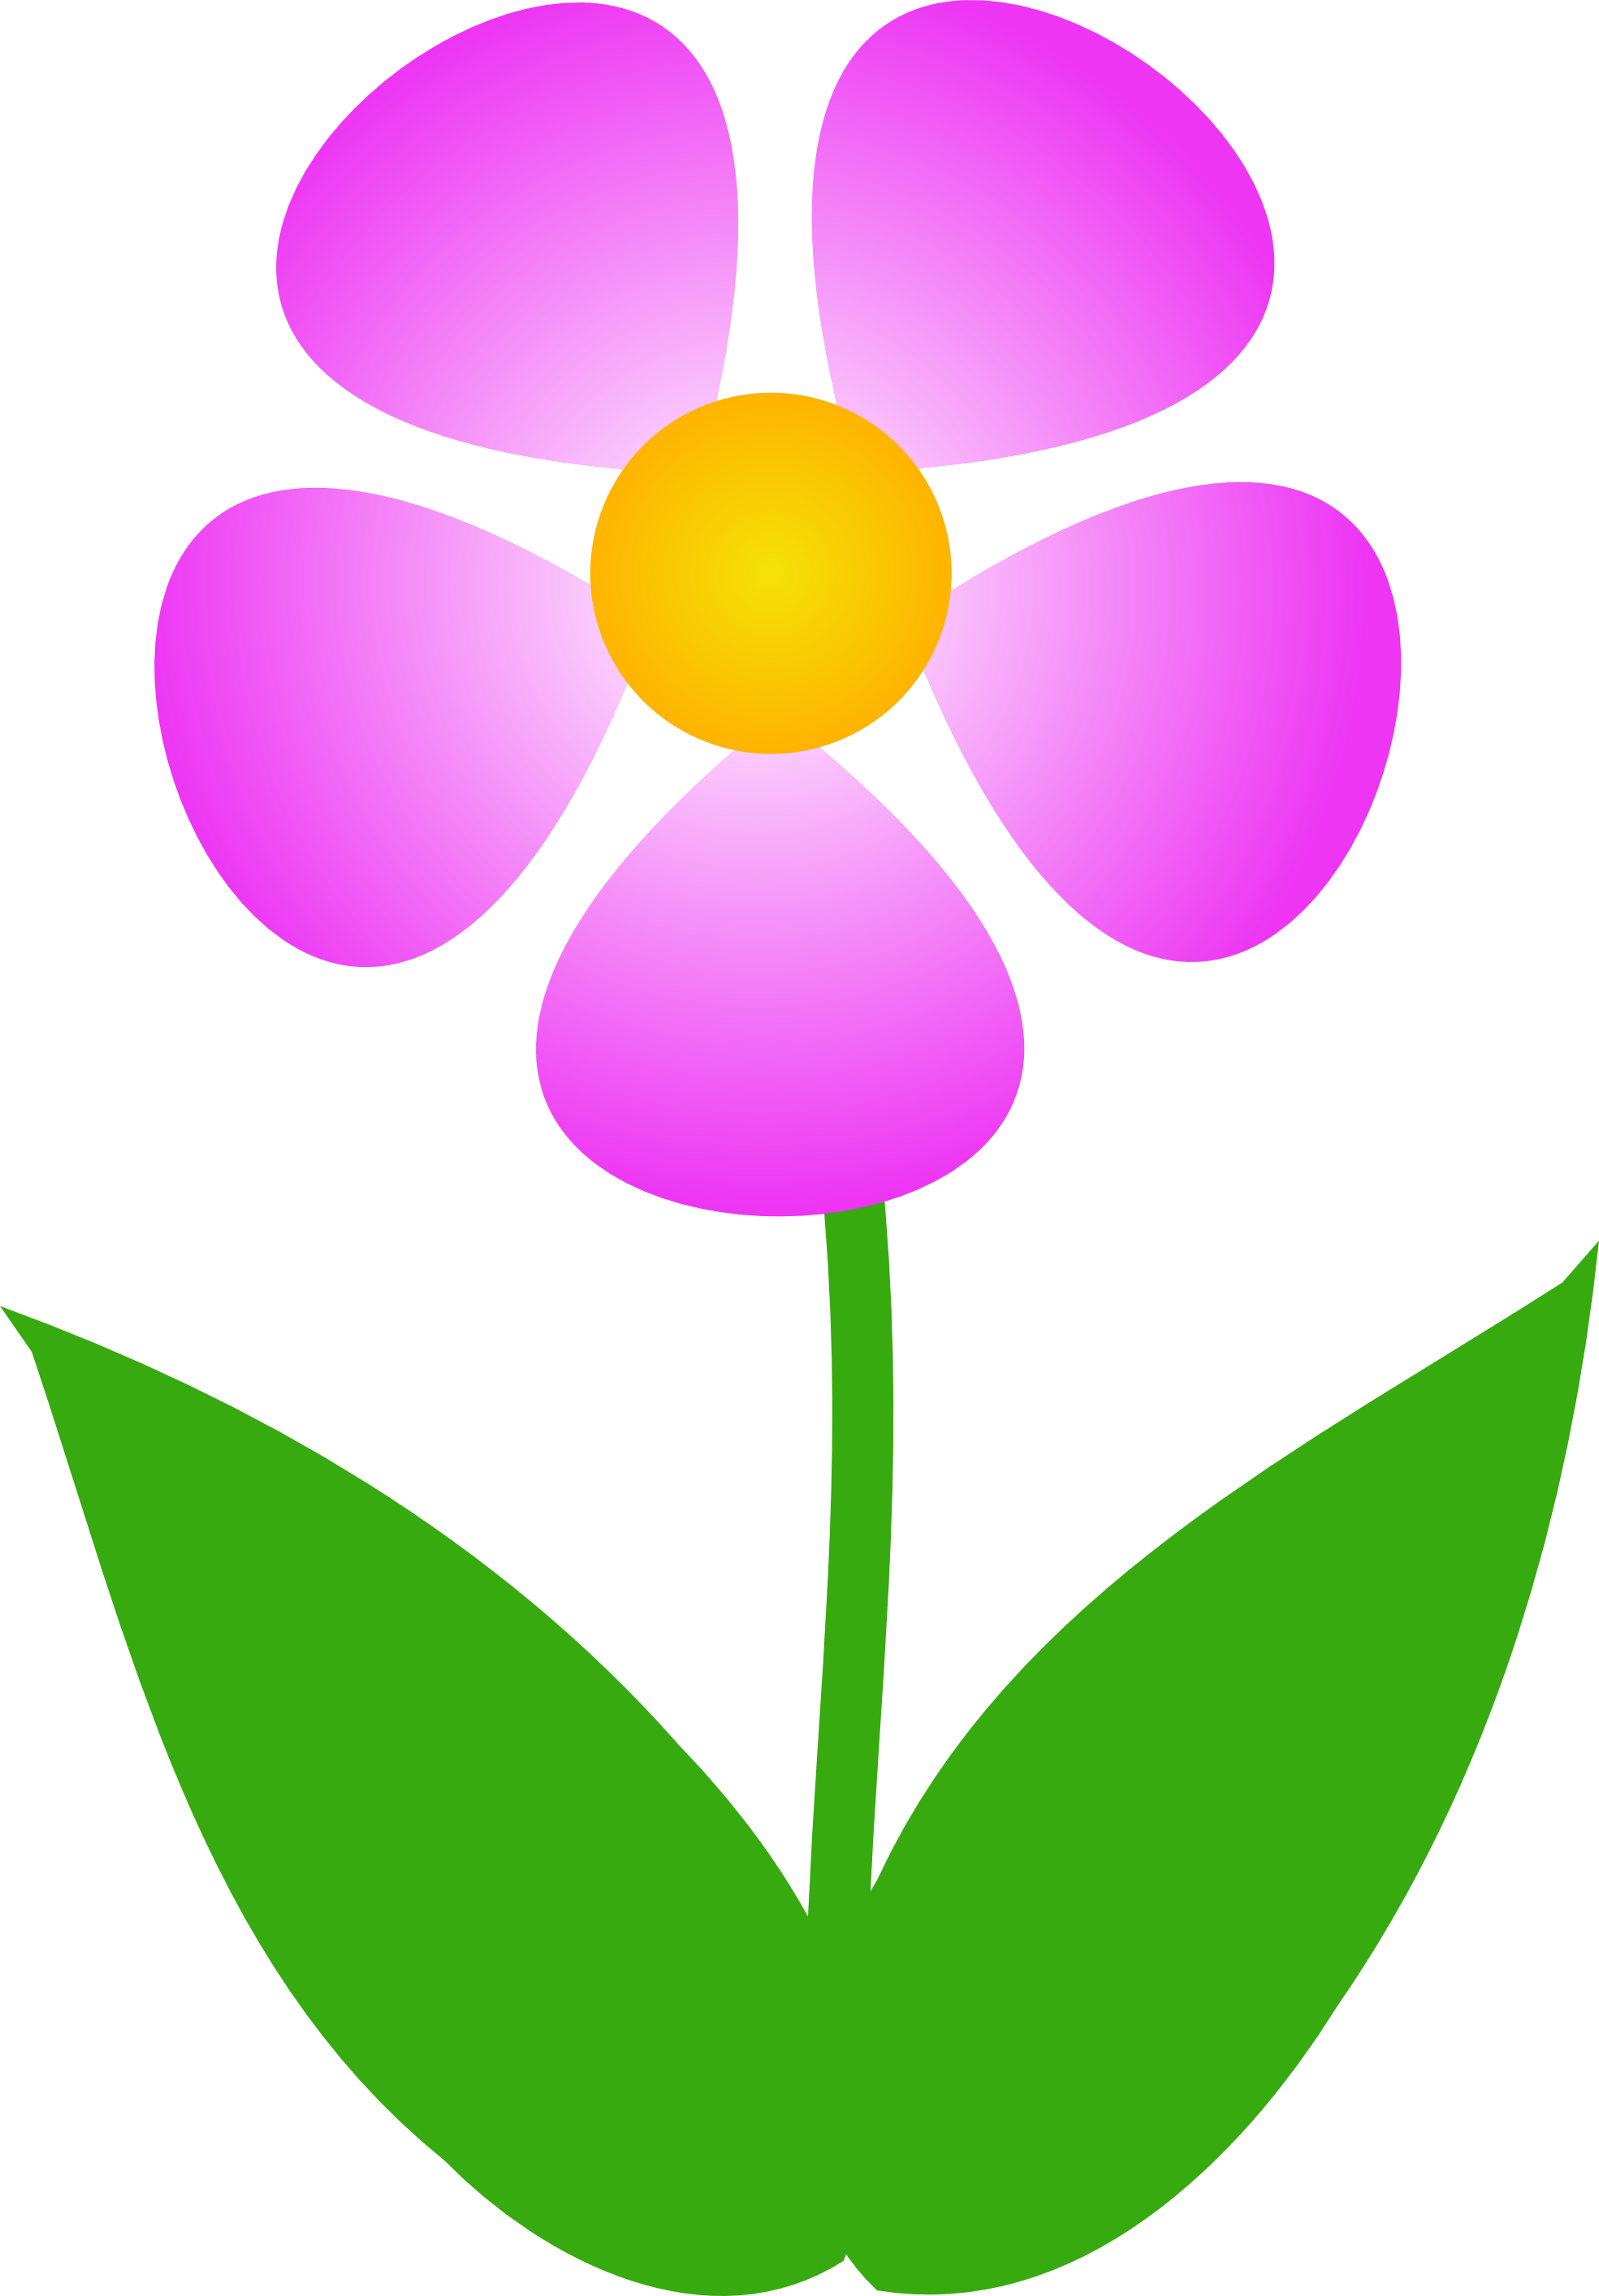 Free clipart images of flowers flower clip art pictures image #2391